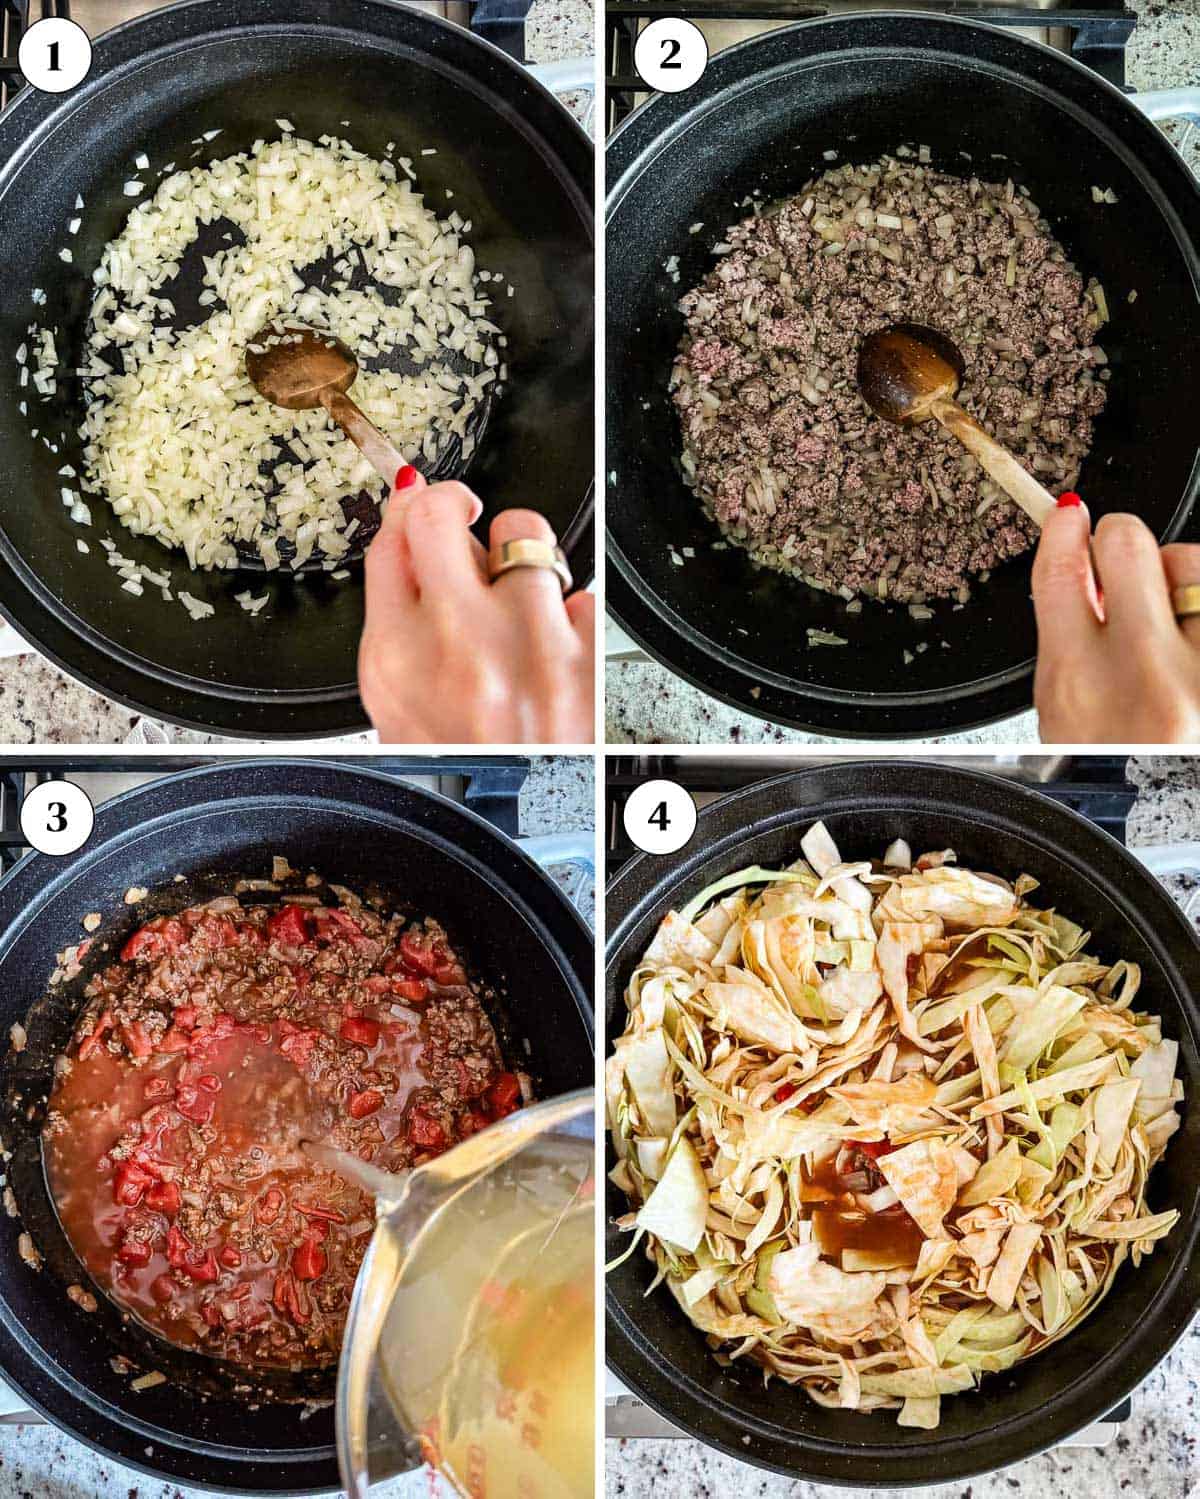 Person showing how to make stuffed cabbage soup in a collage of images.